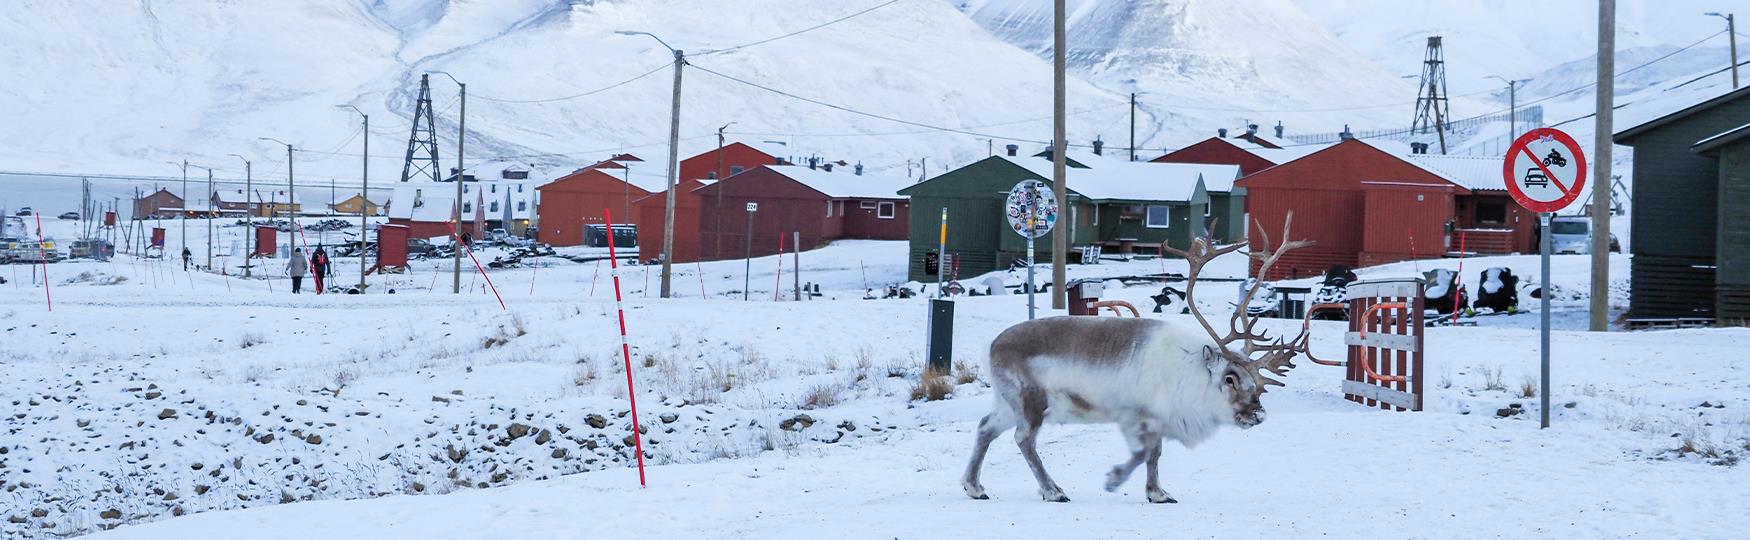 A reindeer crossing a snowy road in the foreground with an urban environment in Longyearbyen and a snow-covered mountain in the background